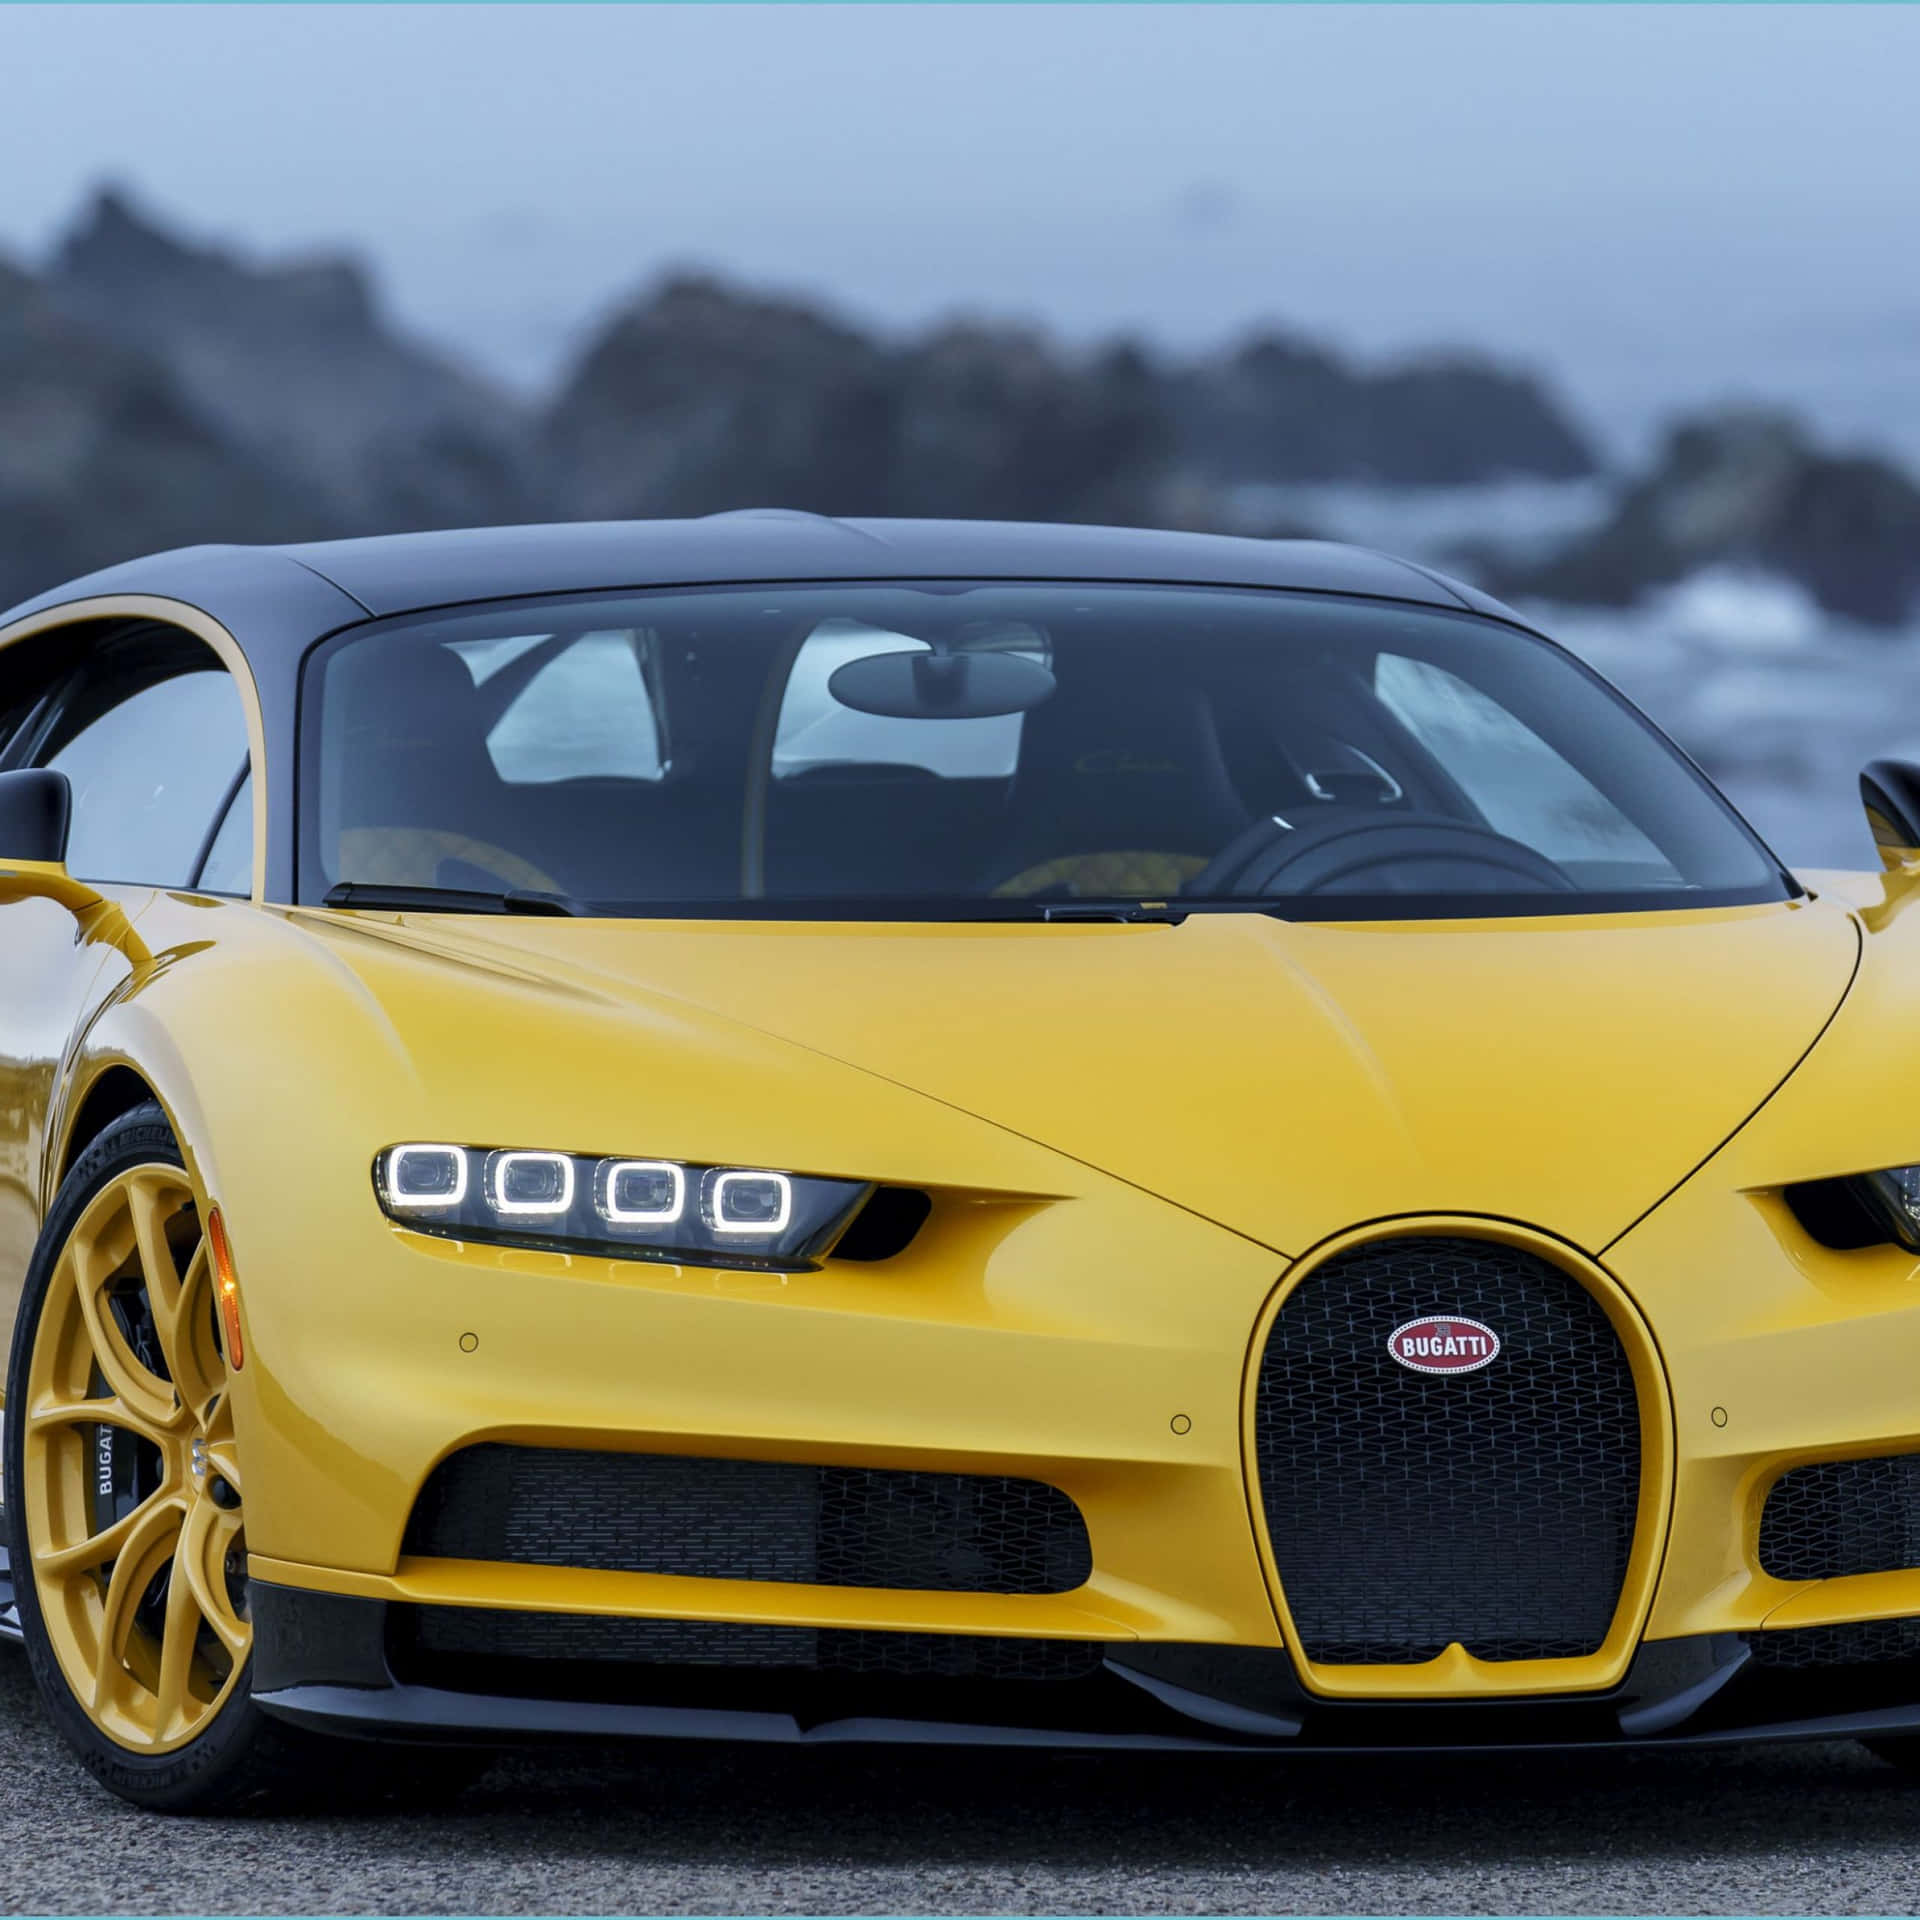 Feel the Thrill of Speeding Through the Streets in a Best Bugatti